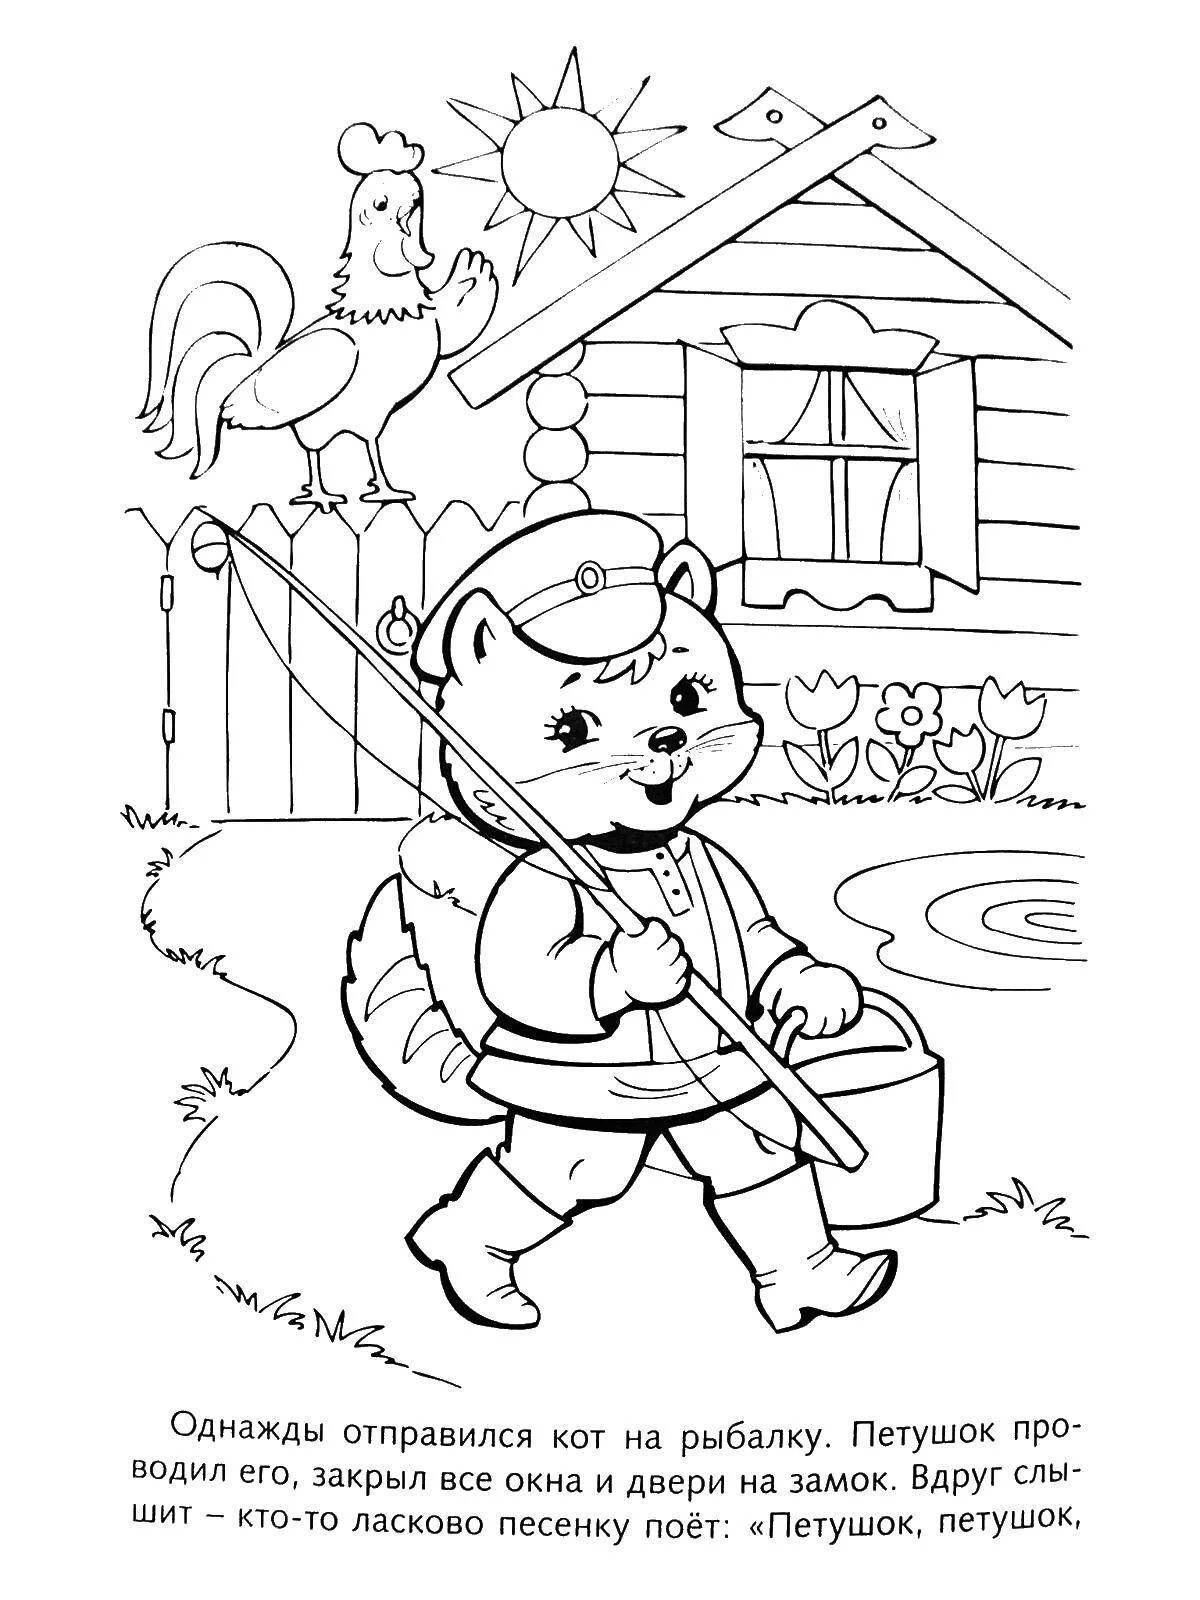 Outstanding fever coloring page